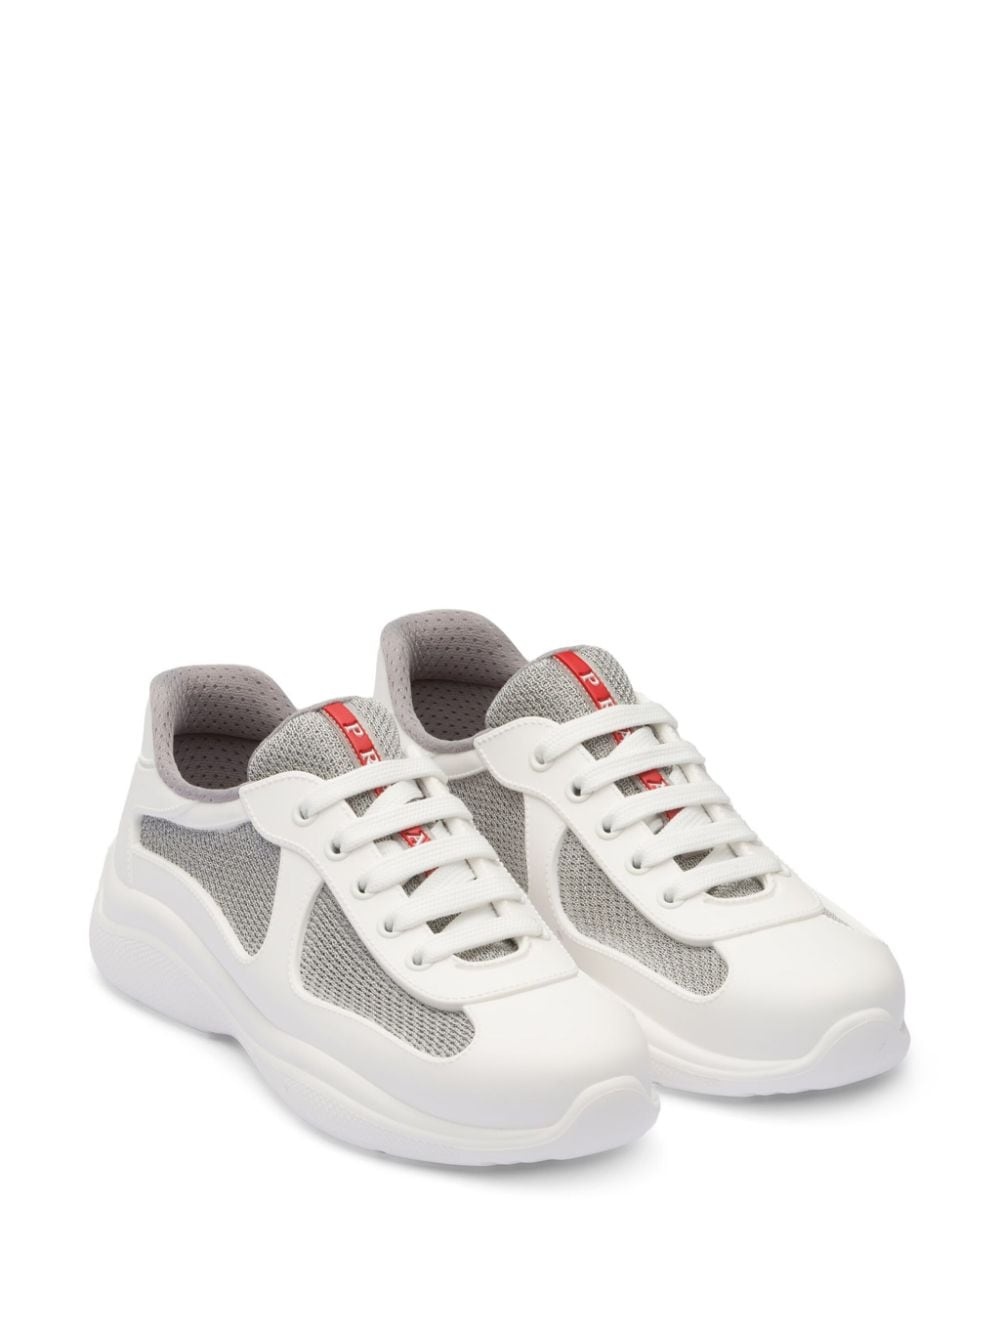 America's Cup panelled sneakers - 2